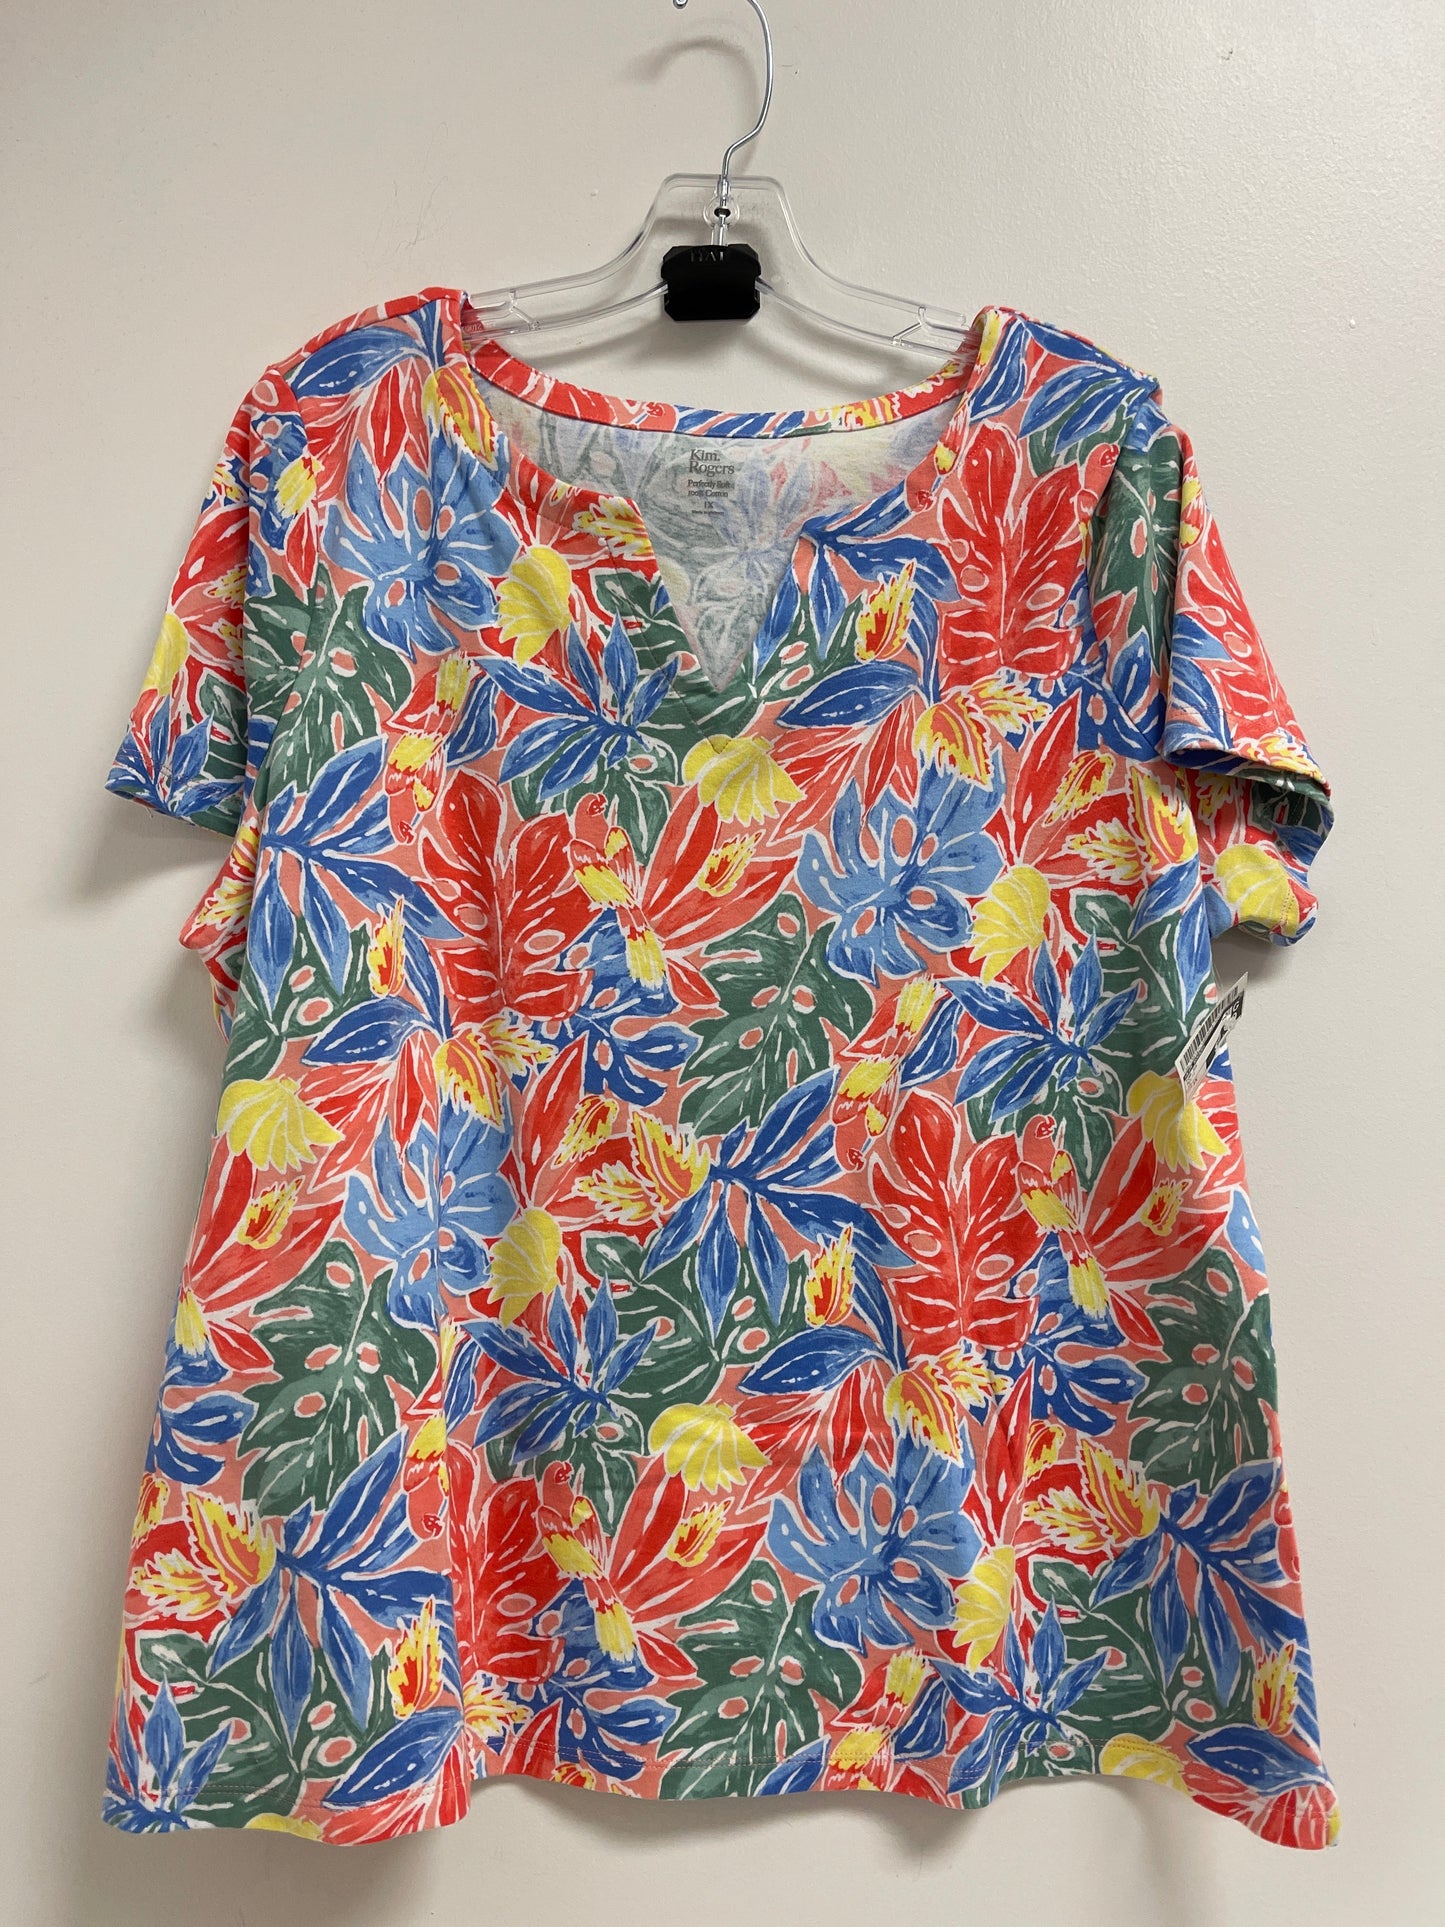 Multi-colored Top Short Sleeve Kim Rogers, Size 1x